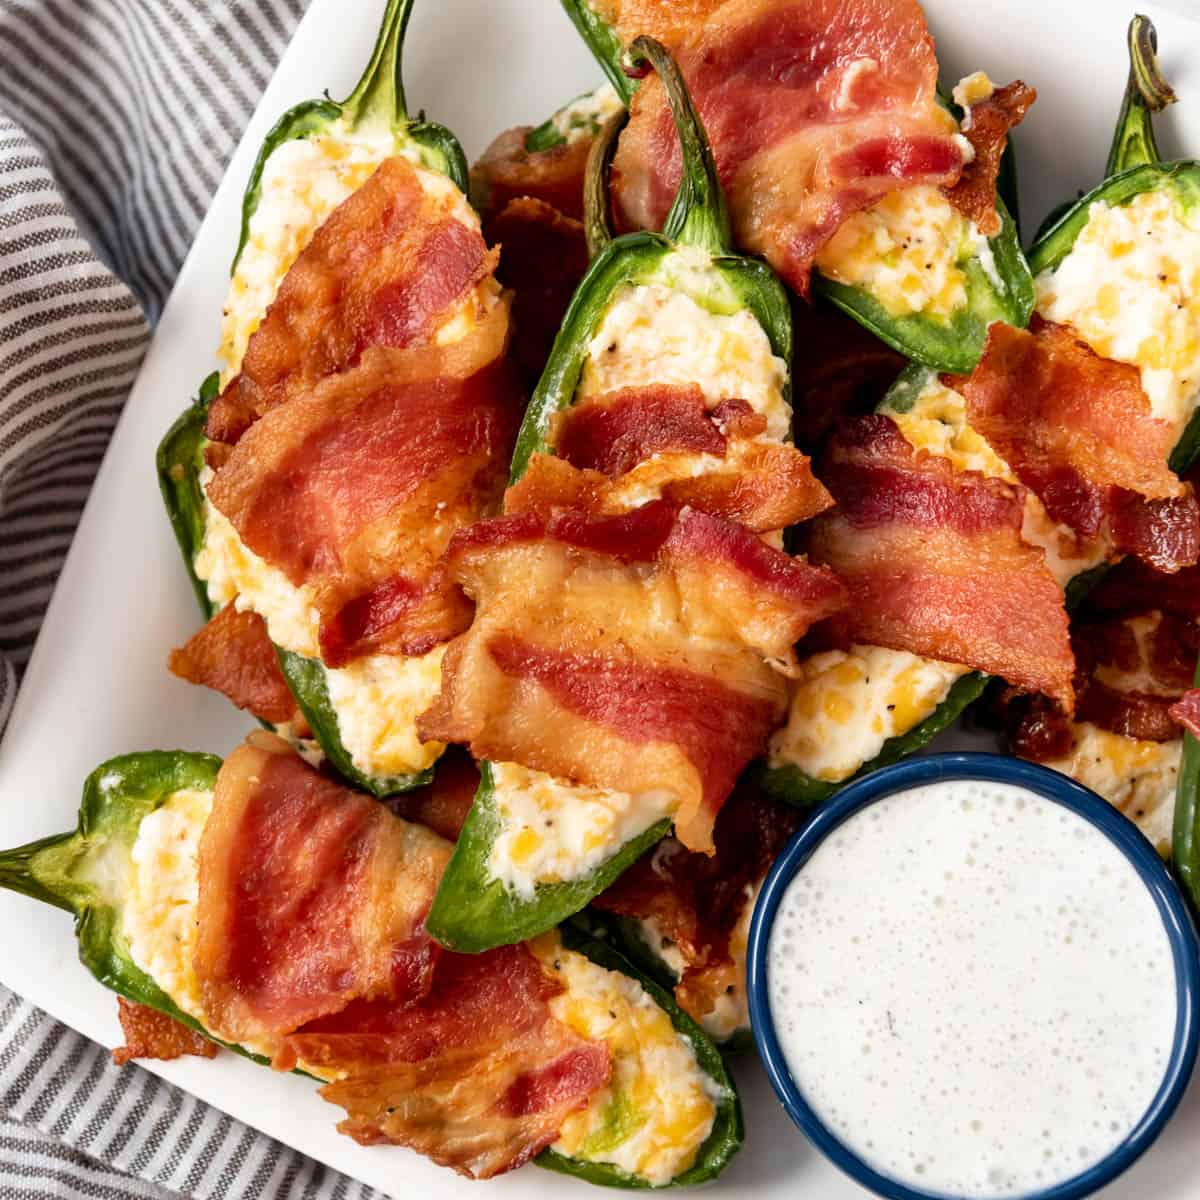 Bacon-Wrapped-Jalapeno-Poppers-Recipe-1.jpg